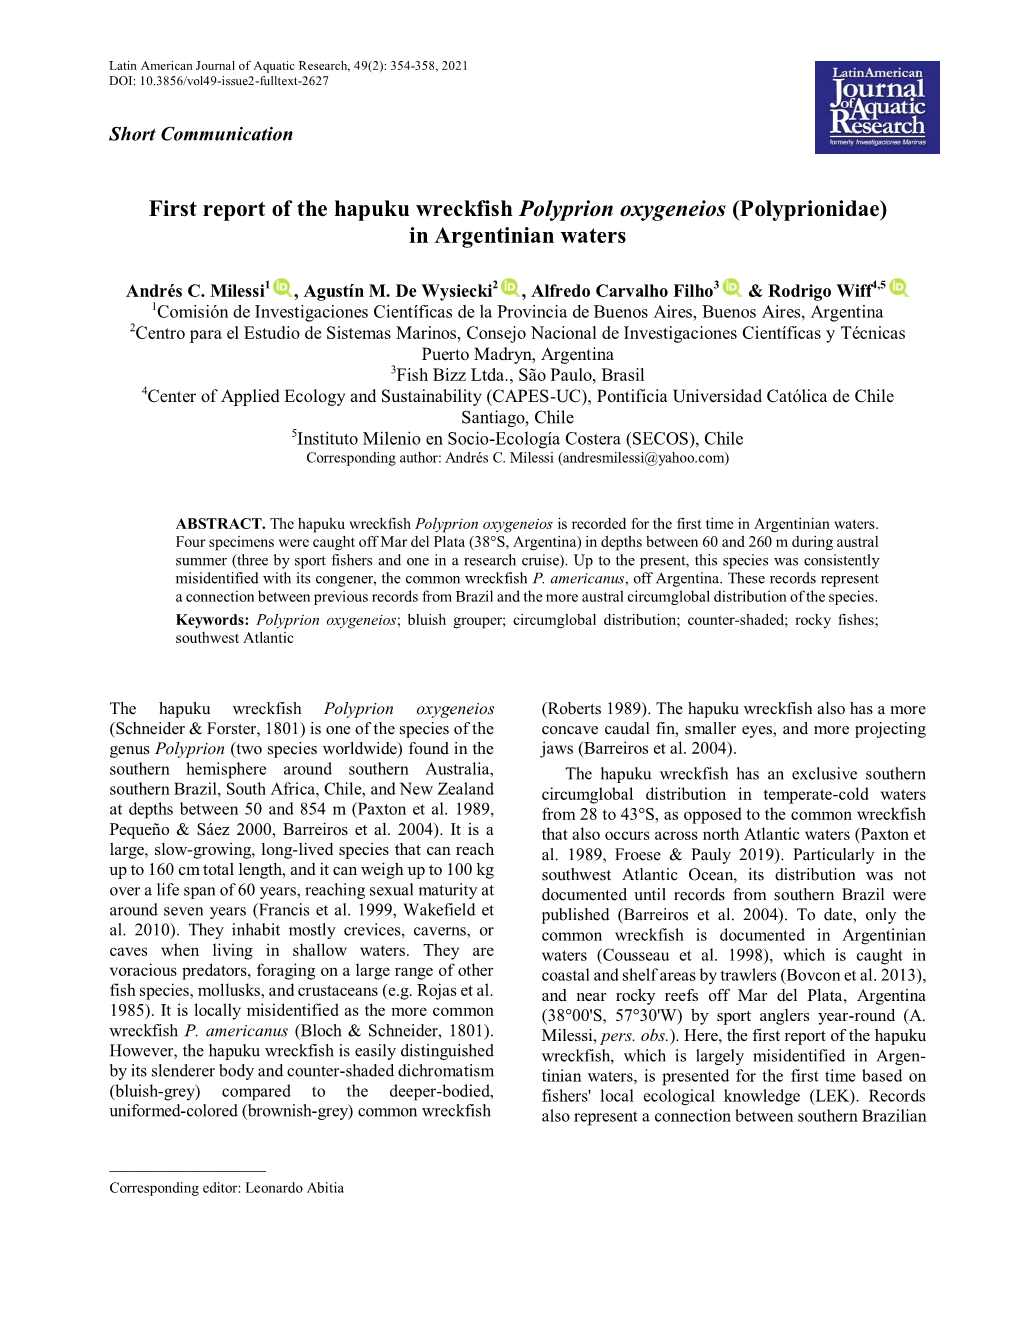 First Report of the Hapuku Wreckfish Polyprion Oxygeneios (Polyprionidae) in Argentinian Waters